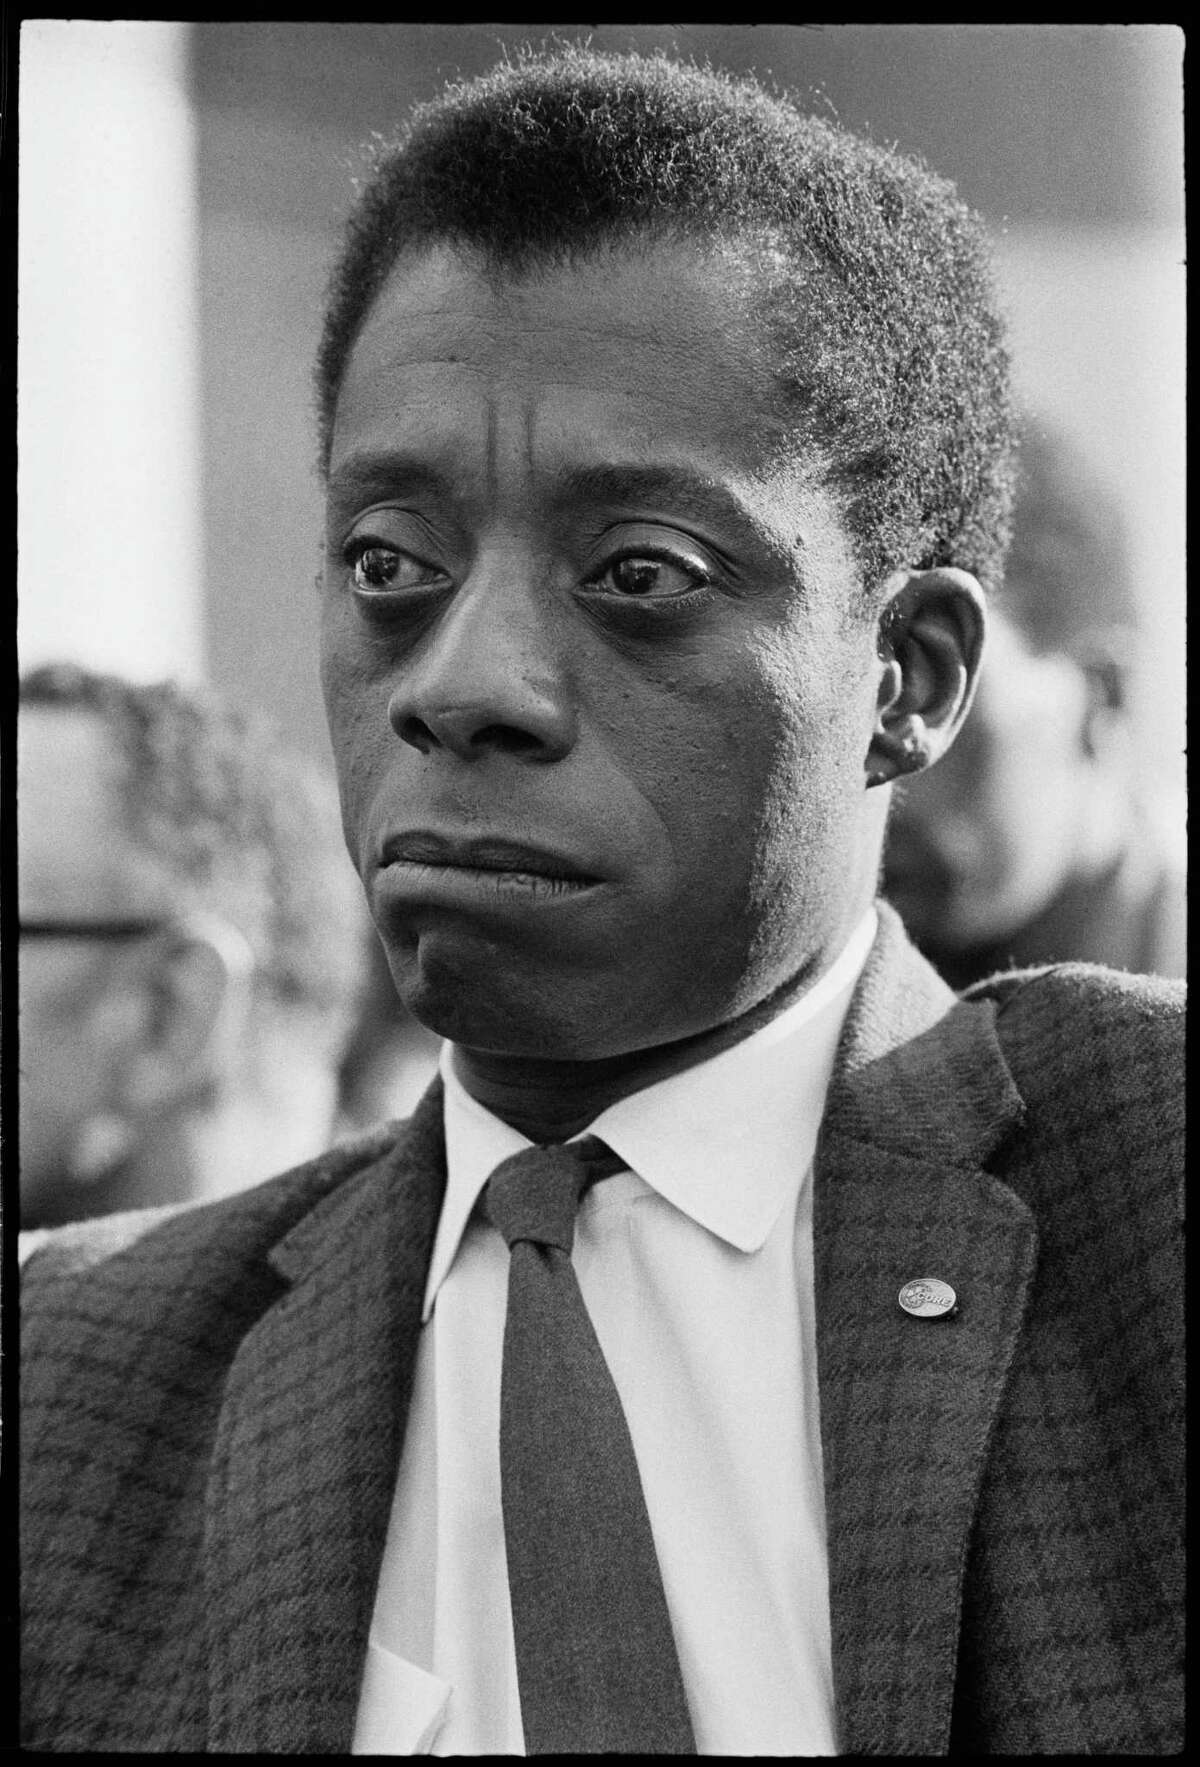 “Not everything that is faced can be changed, but nothing can be changed until it is faced,” wrote James Baldwin. It is the perfect response to Re. Matt Krause’s little book probe.